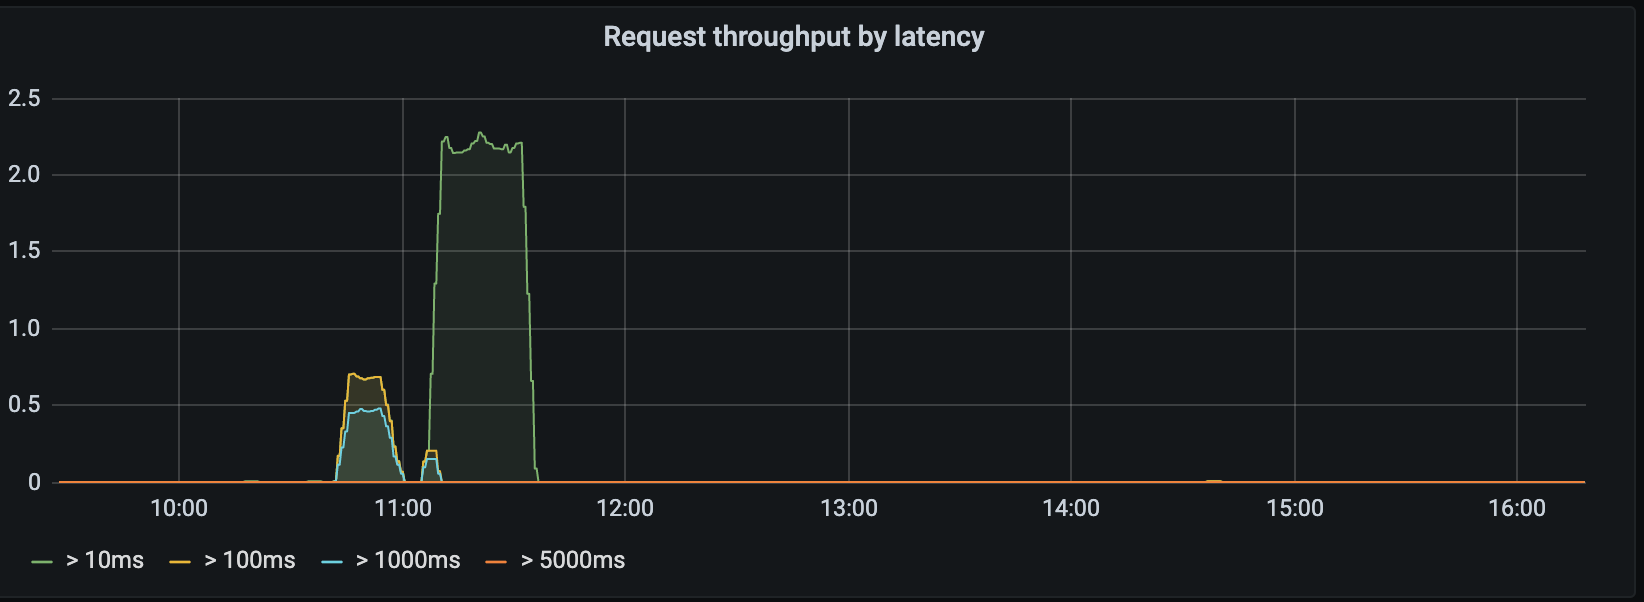 Request throughput by latency